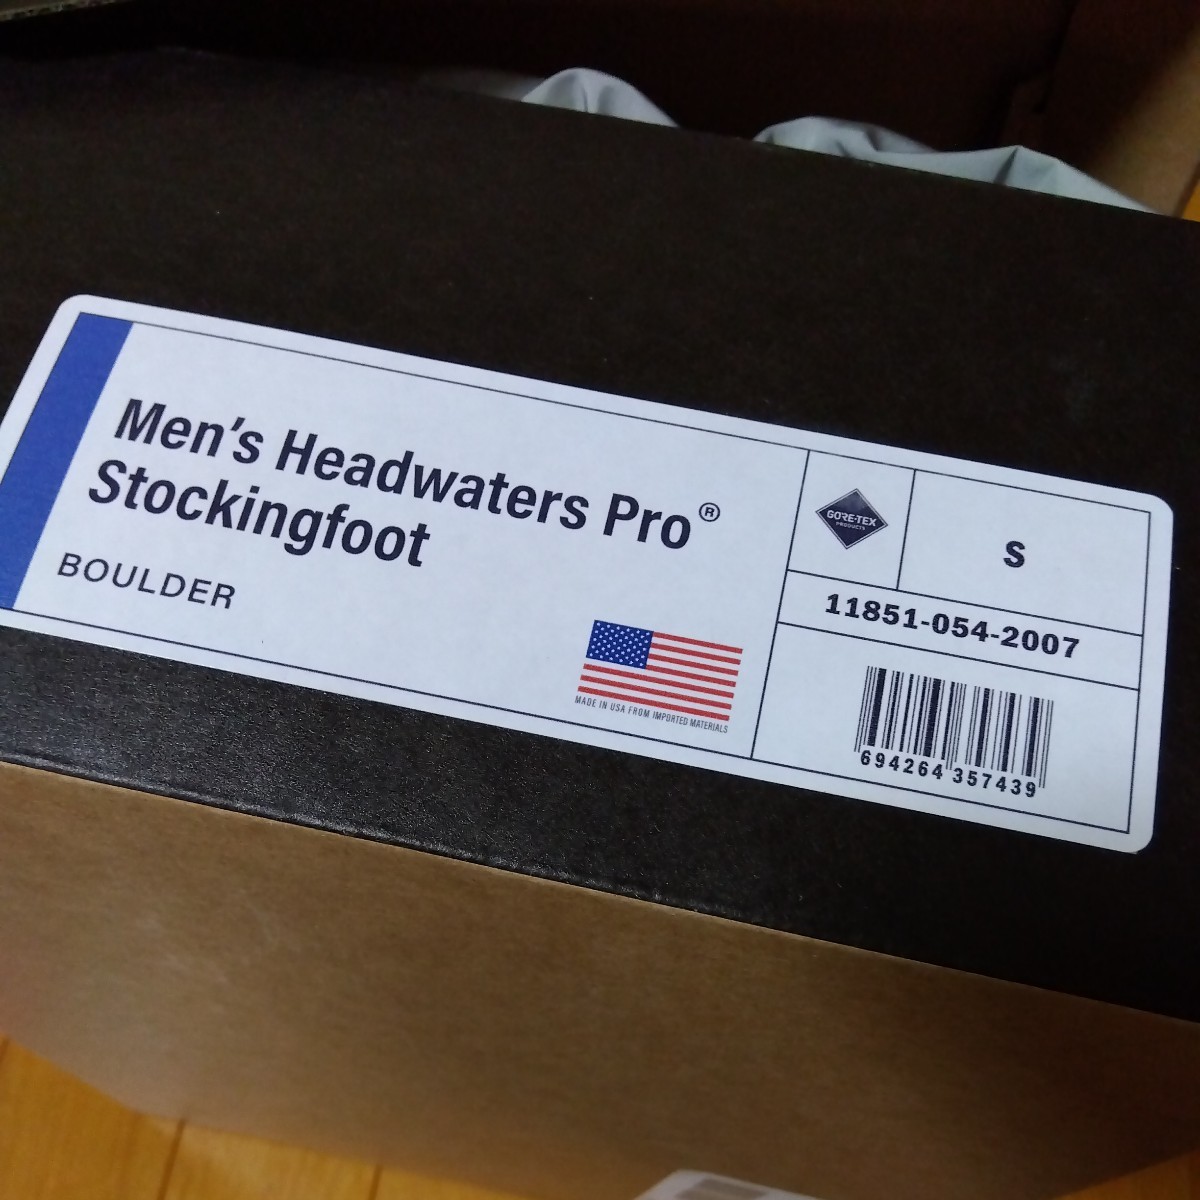 simms headwaters pro stockingfoot Syms head water Pro stockings foot Boulder Small